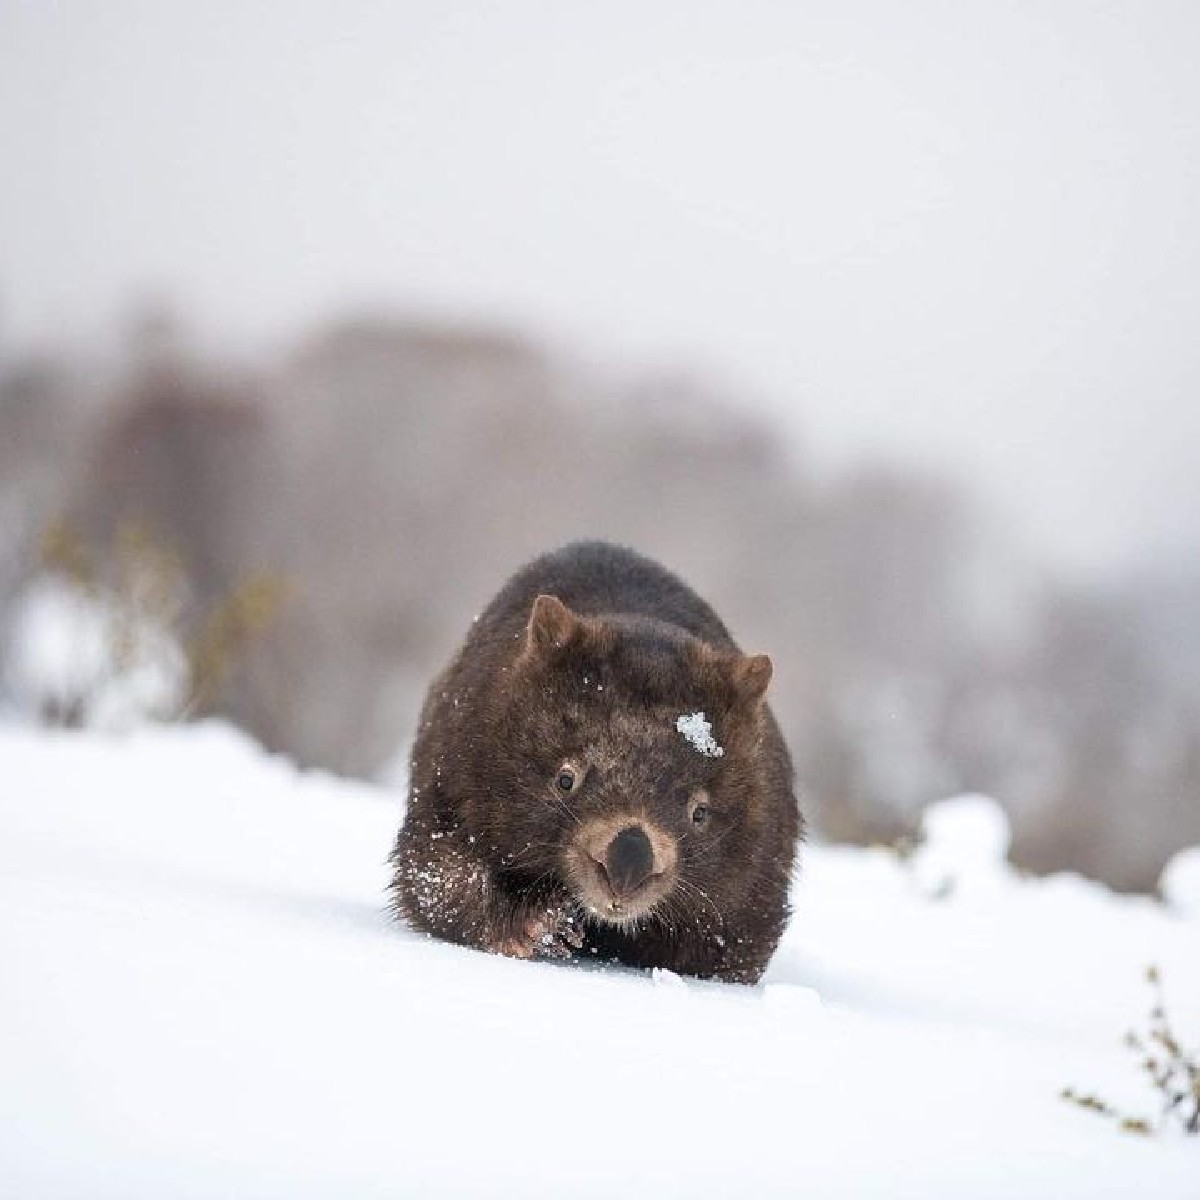 Hello, winter! ❄️ 

It's the first day of winter in Australia! Thanks to IG/charlesdavisphotography for capturing the resident wildlife enjoying the frosty weather in the #SnowyMountains.

#seeaustralia #LoveNSW #snowymountainsnsw #holidayherethisyear